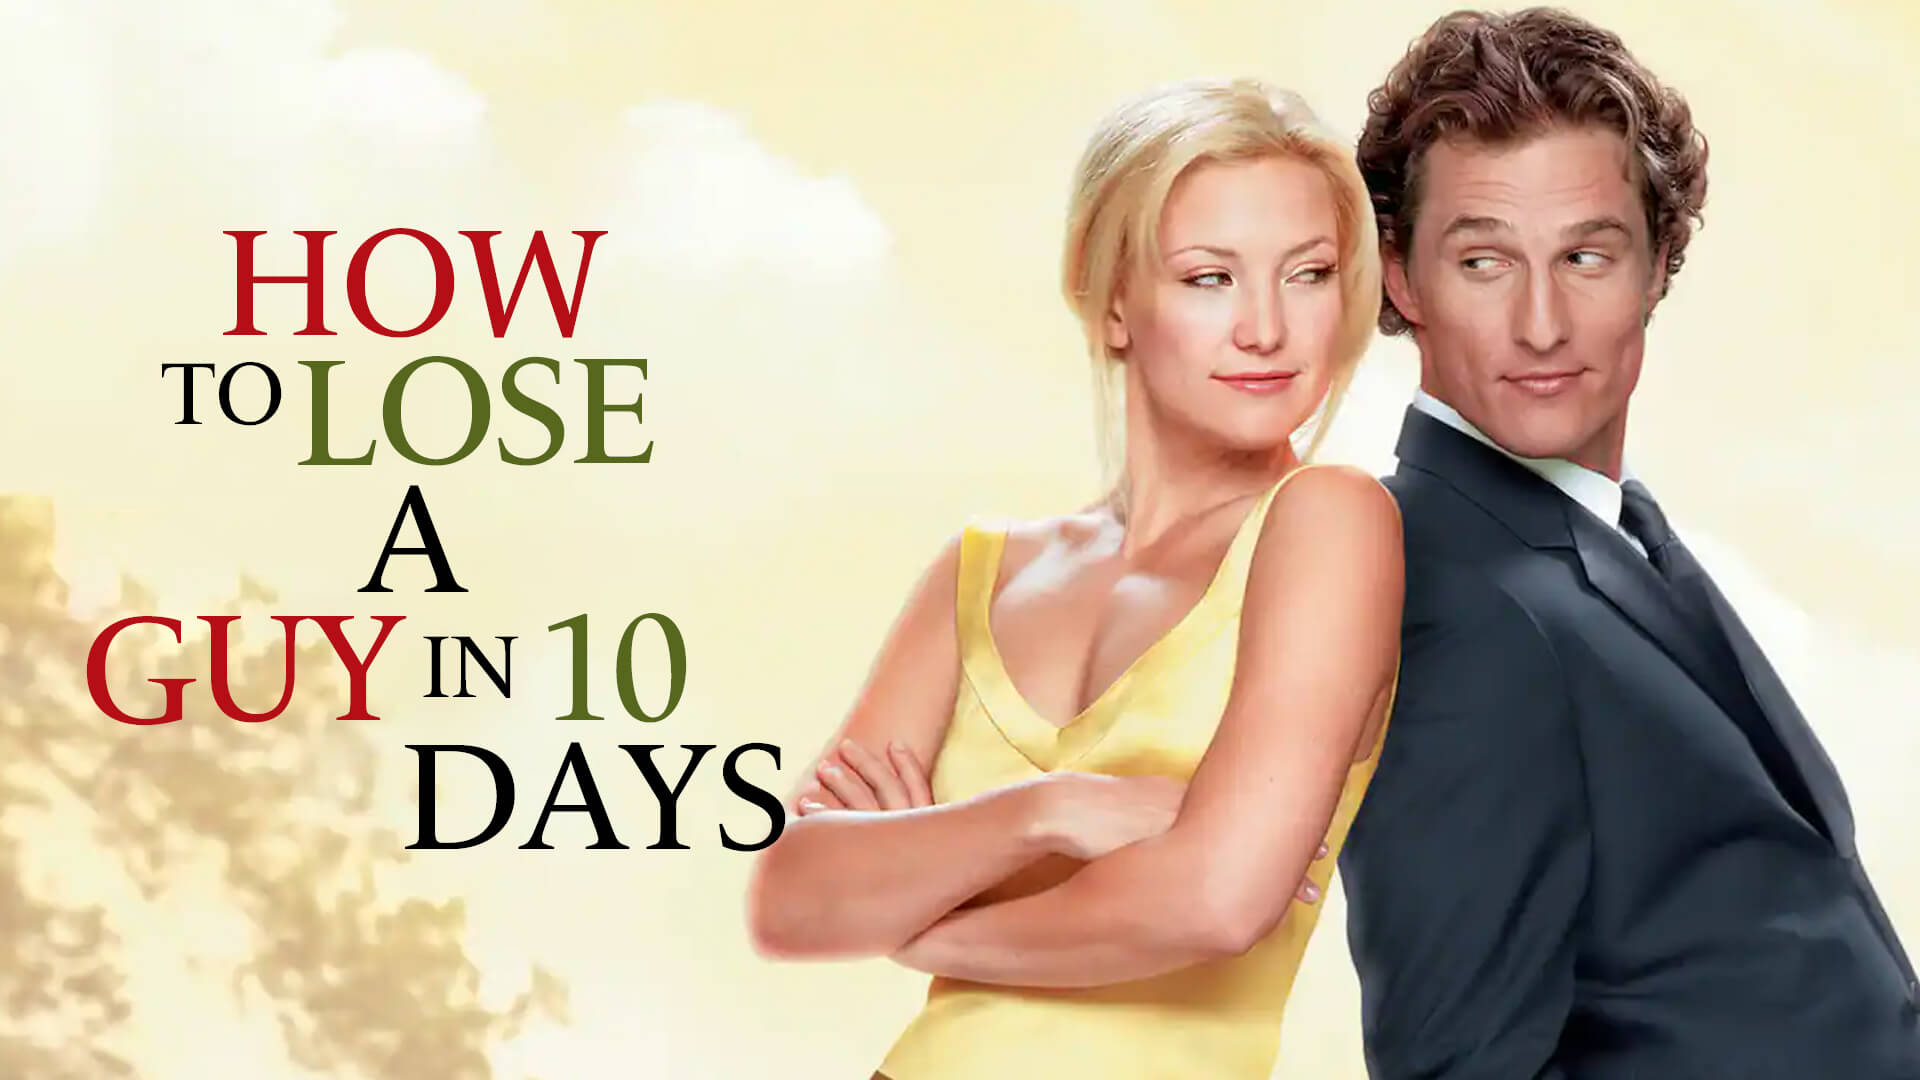 How-to-Lose-a-Guy-in-10-Days-in-UAE-best-movie